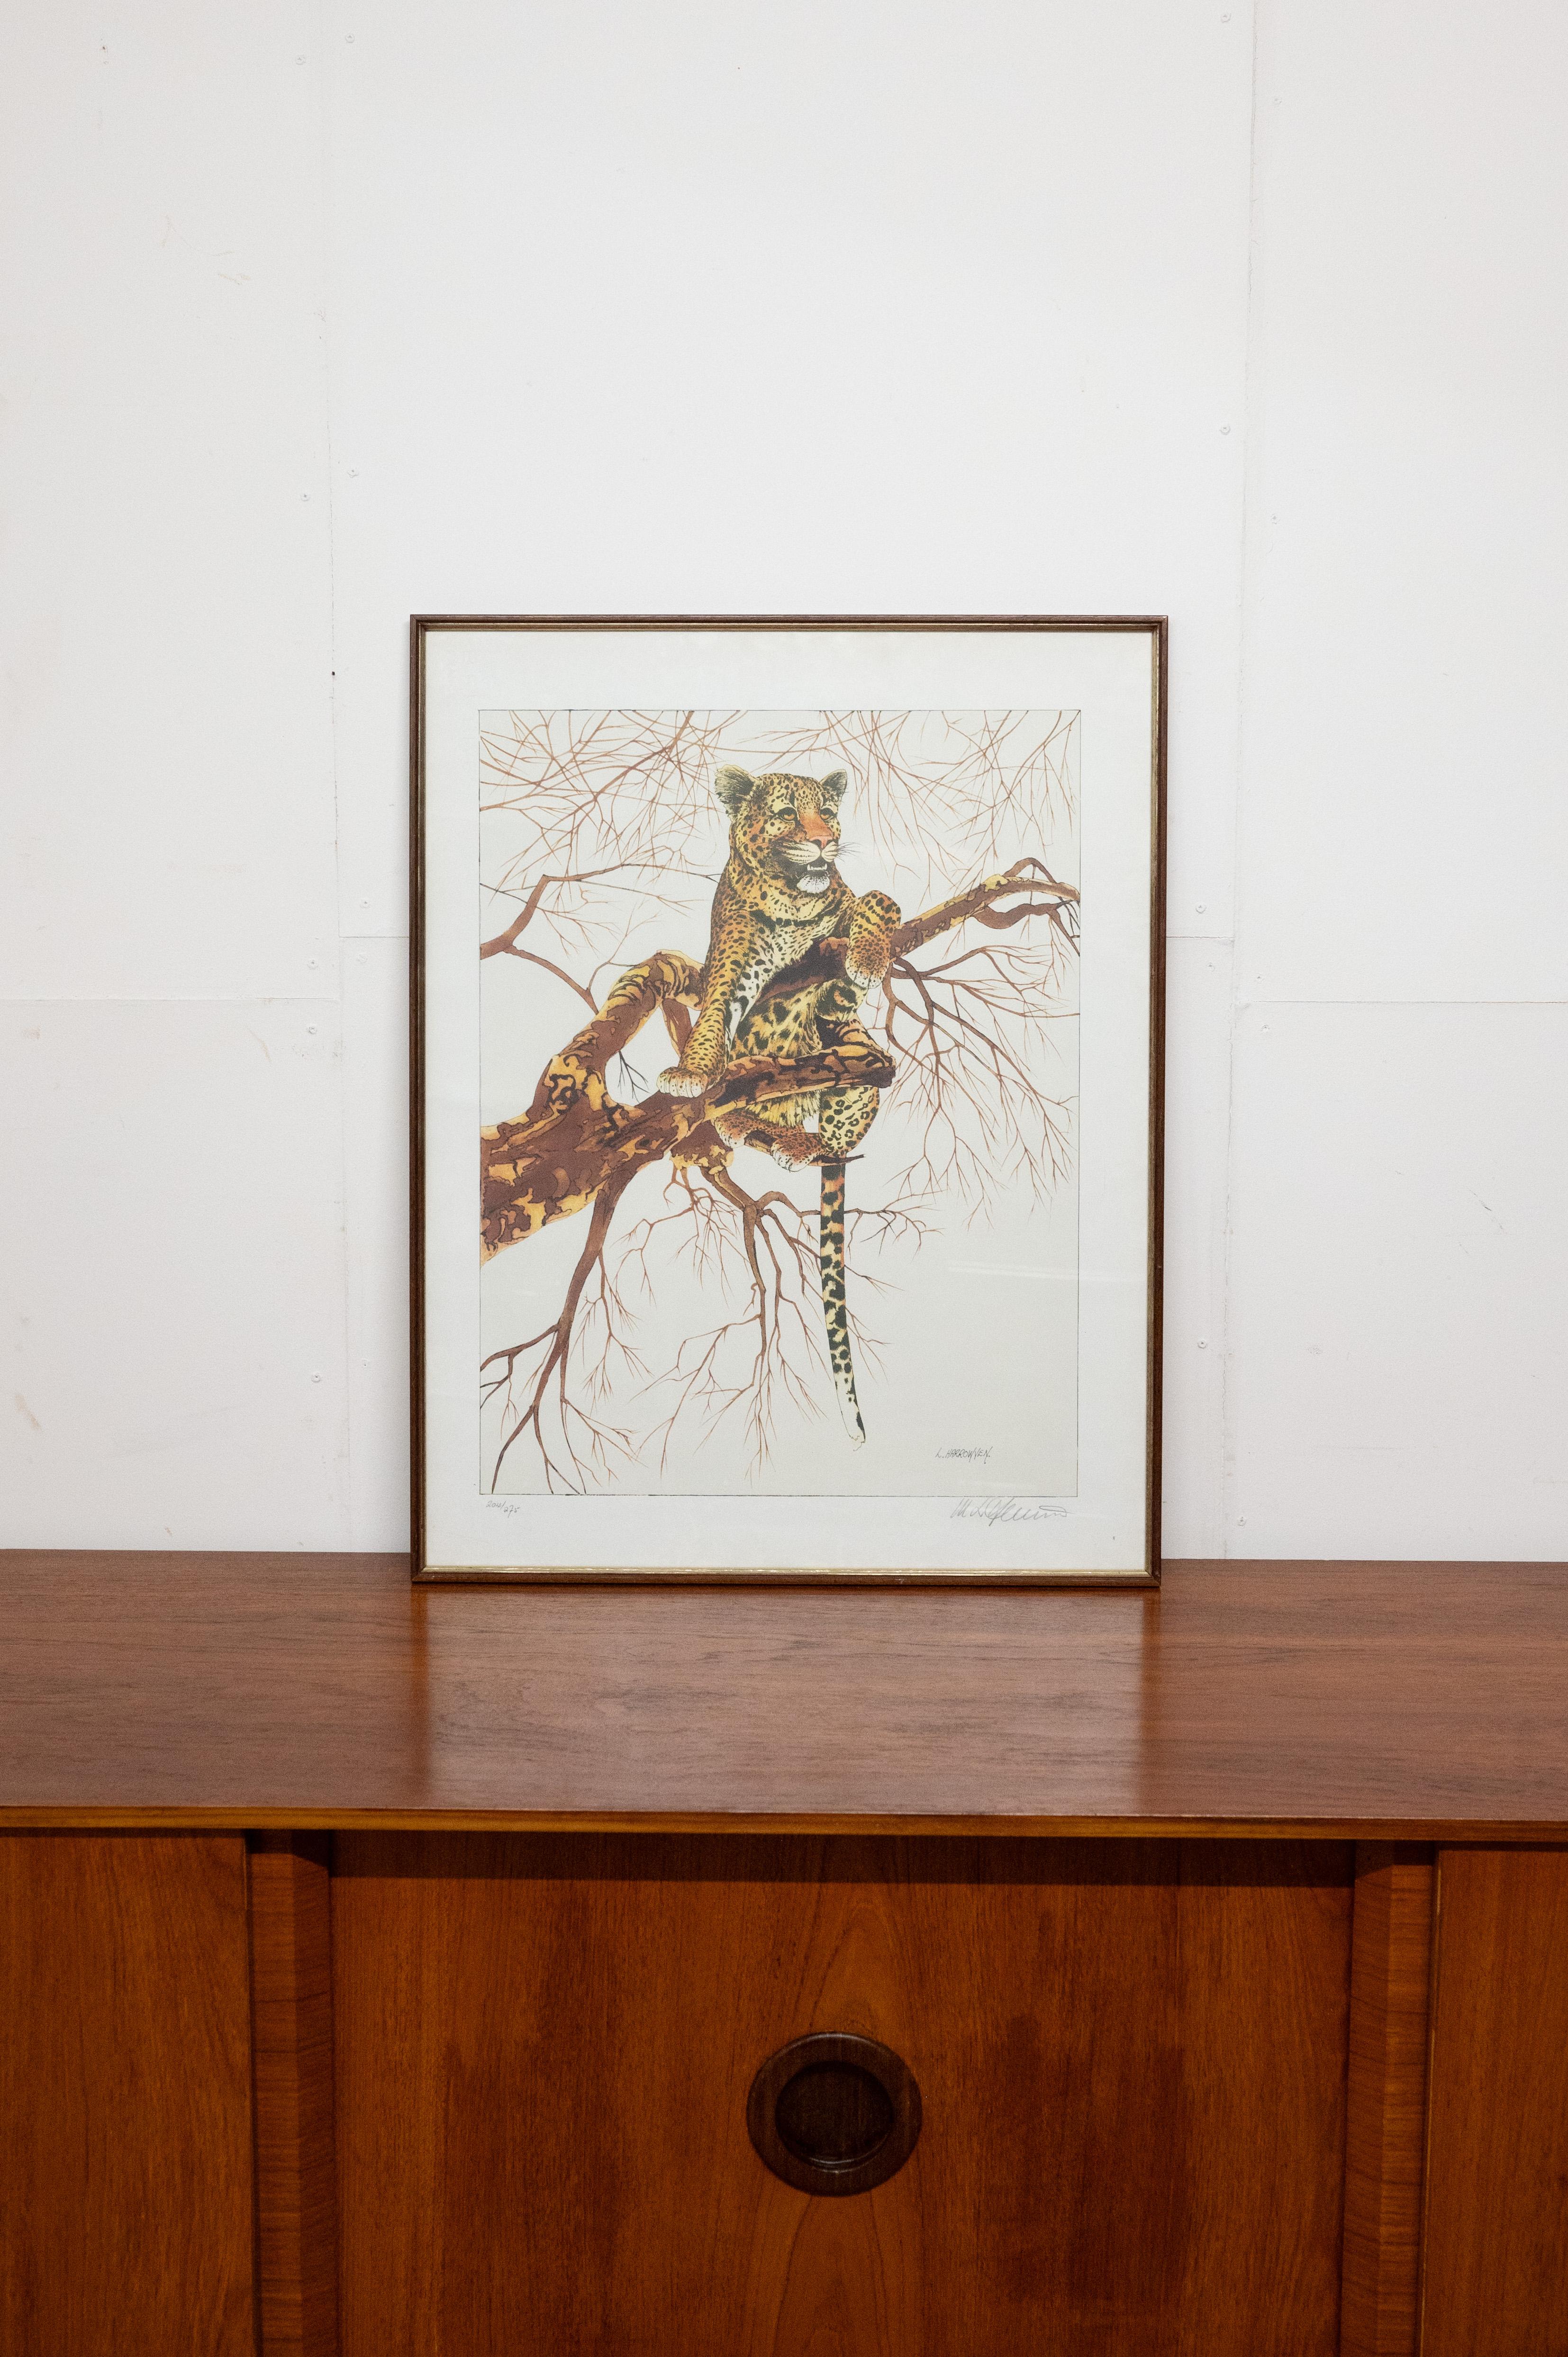 Elevate your space with a dash of wild charm and playfulness through this captivating print of a Leopard in a tree, a lively and captivating piece of art.
This print captures the essence of nature's most majestic feline, framed by the intricate